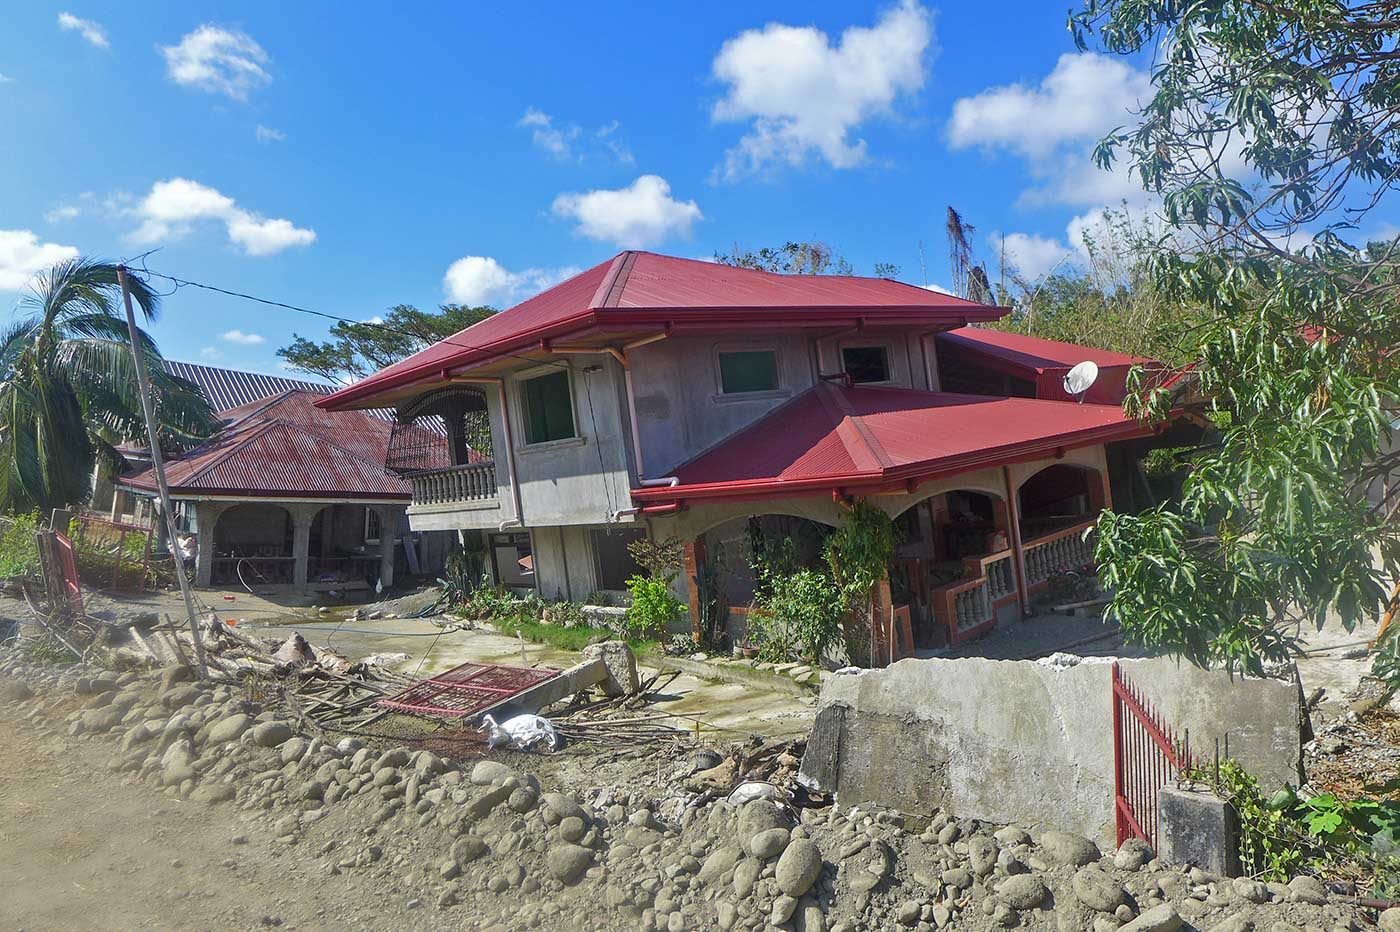 CRACKED. Houses in the upland village of Barangay Amguid in Ilocos Sur gradually rocked and cracked by continuous downpour during the month long monsoon rains last August. Photo by Mau Victa/Rappler   